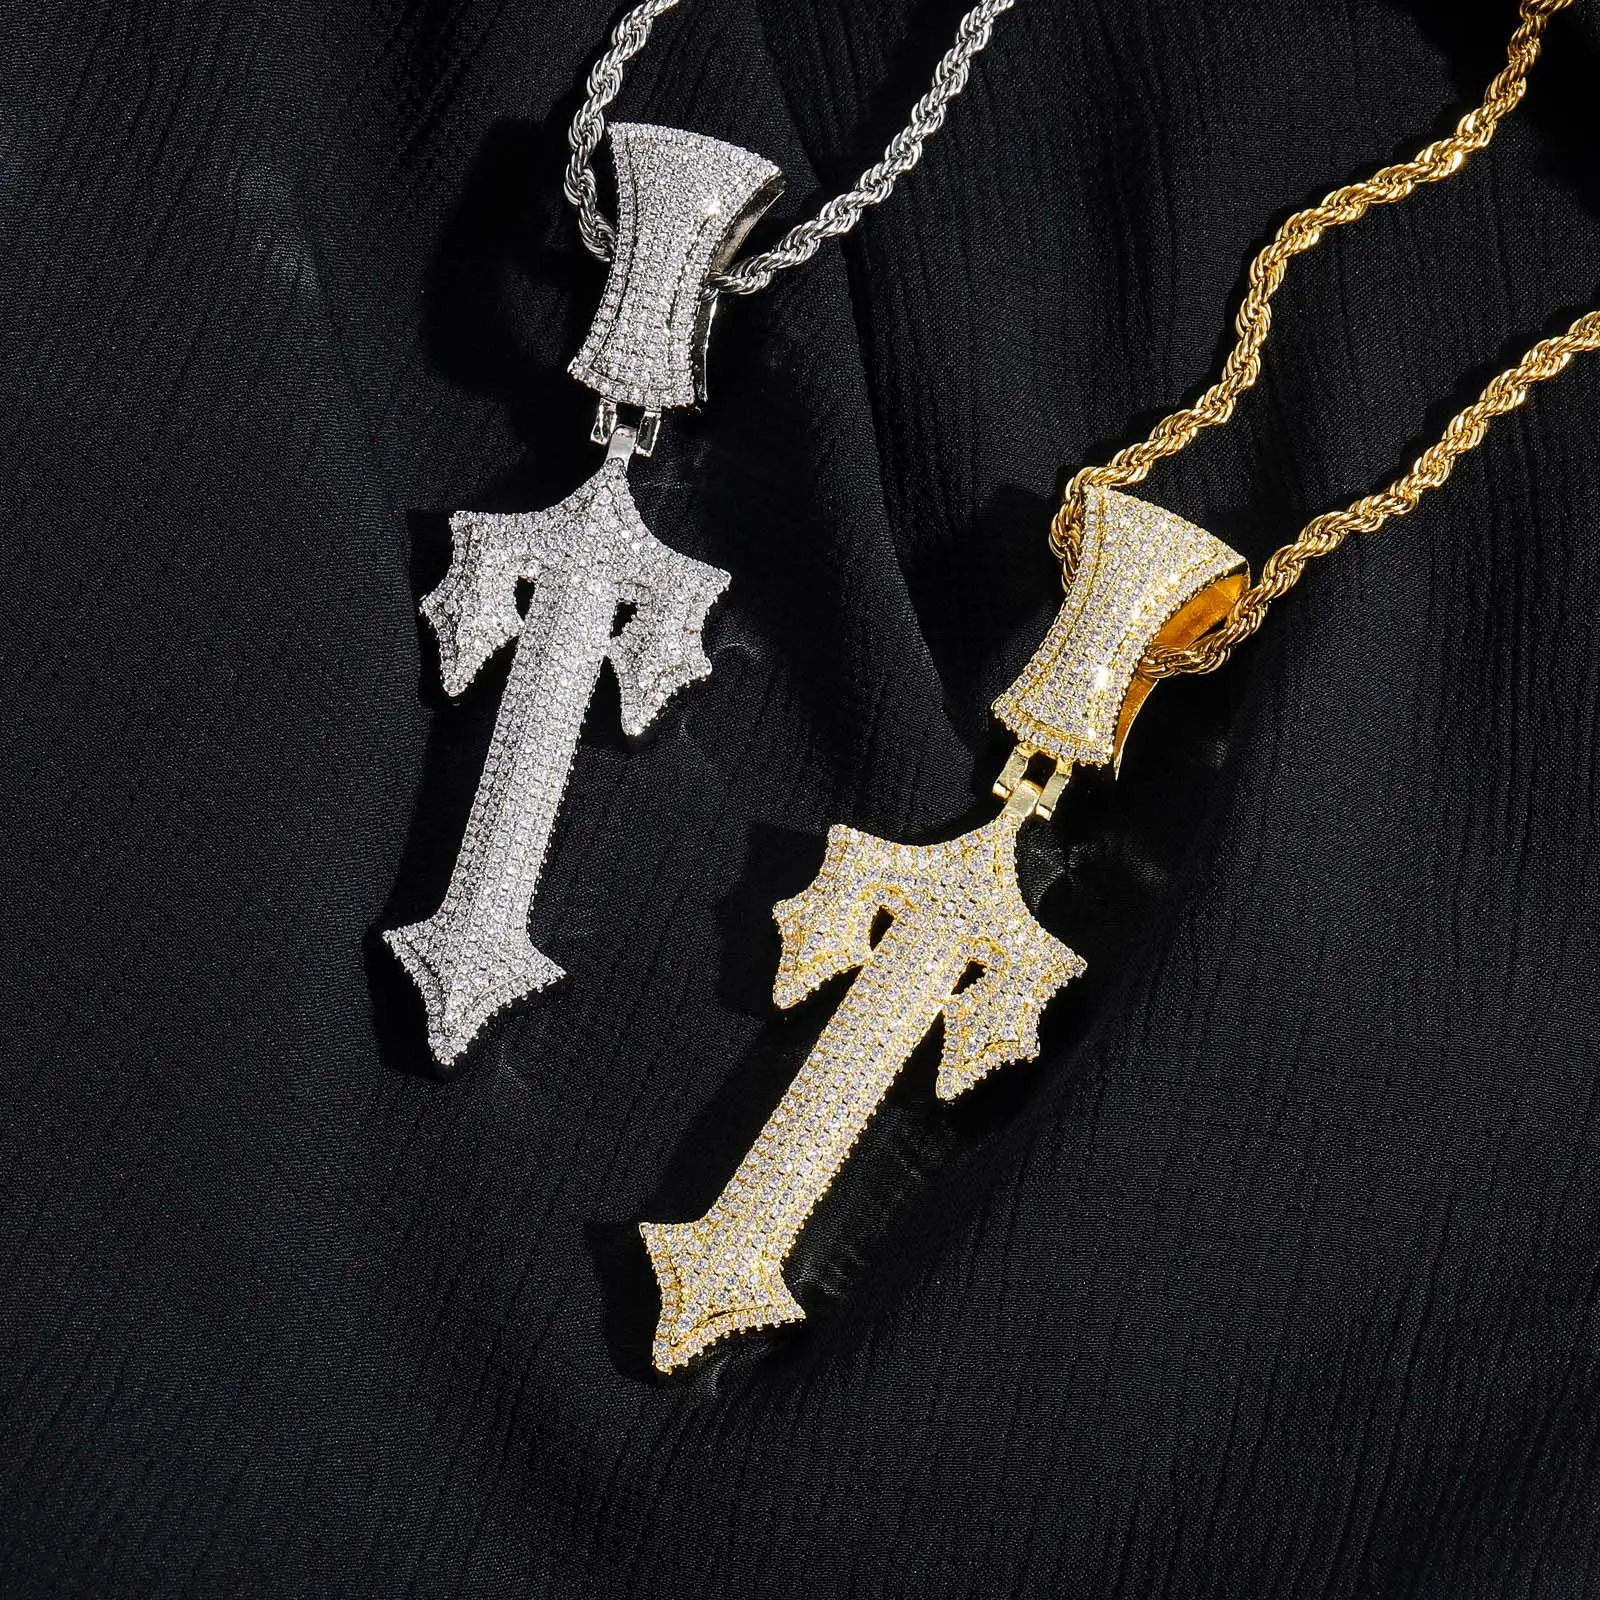 Fashion Men's Hip Hop Necklace Jewelry Icy Bling Cubic Zirconia Letter Pendant Iced Out Diamond Cross Sword Pendant Pendant